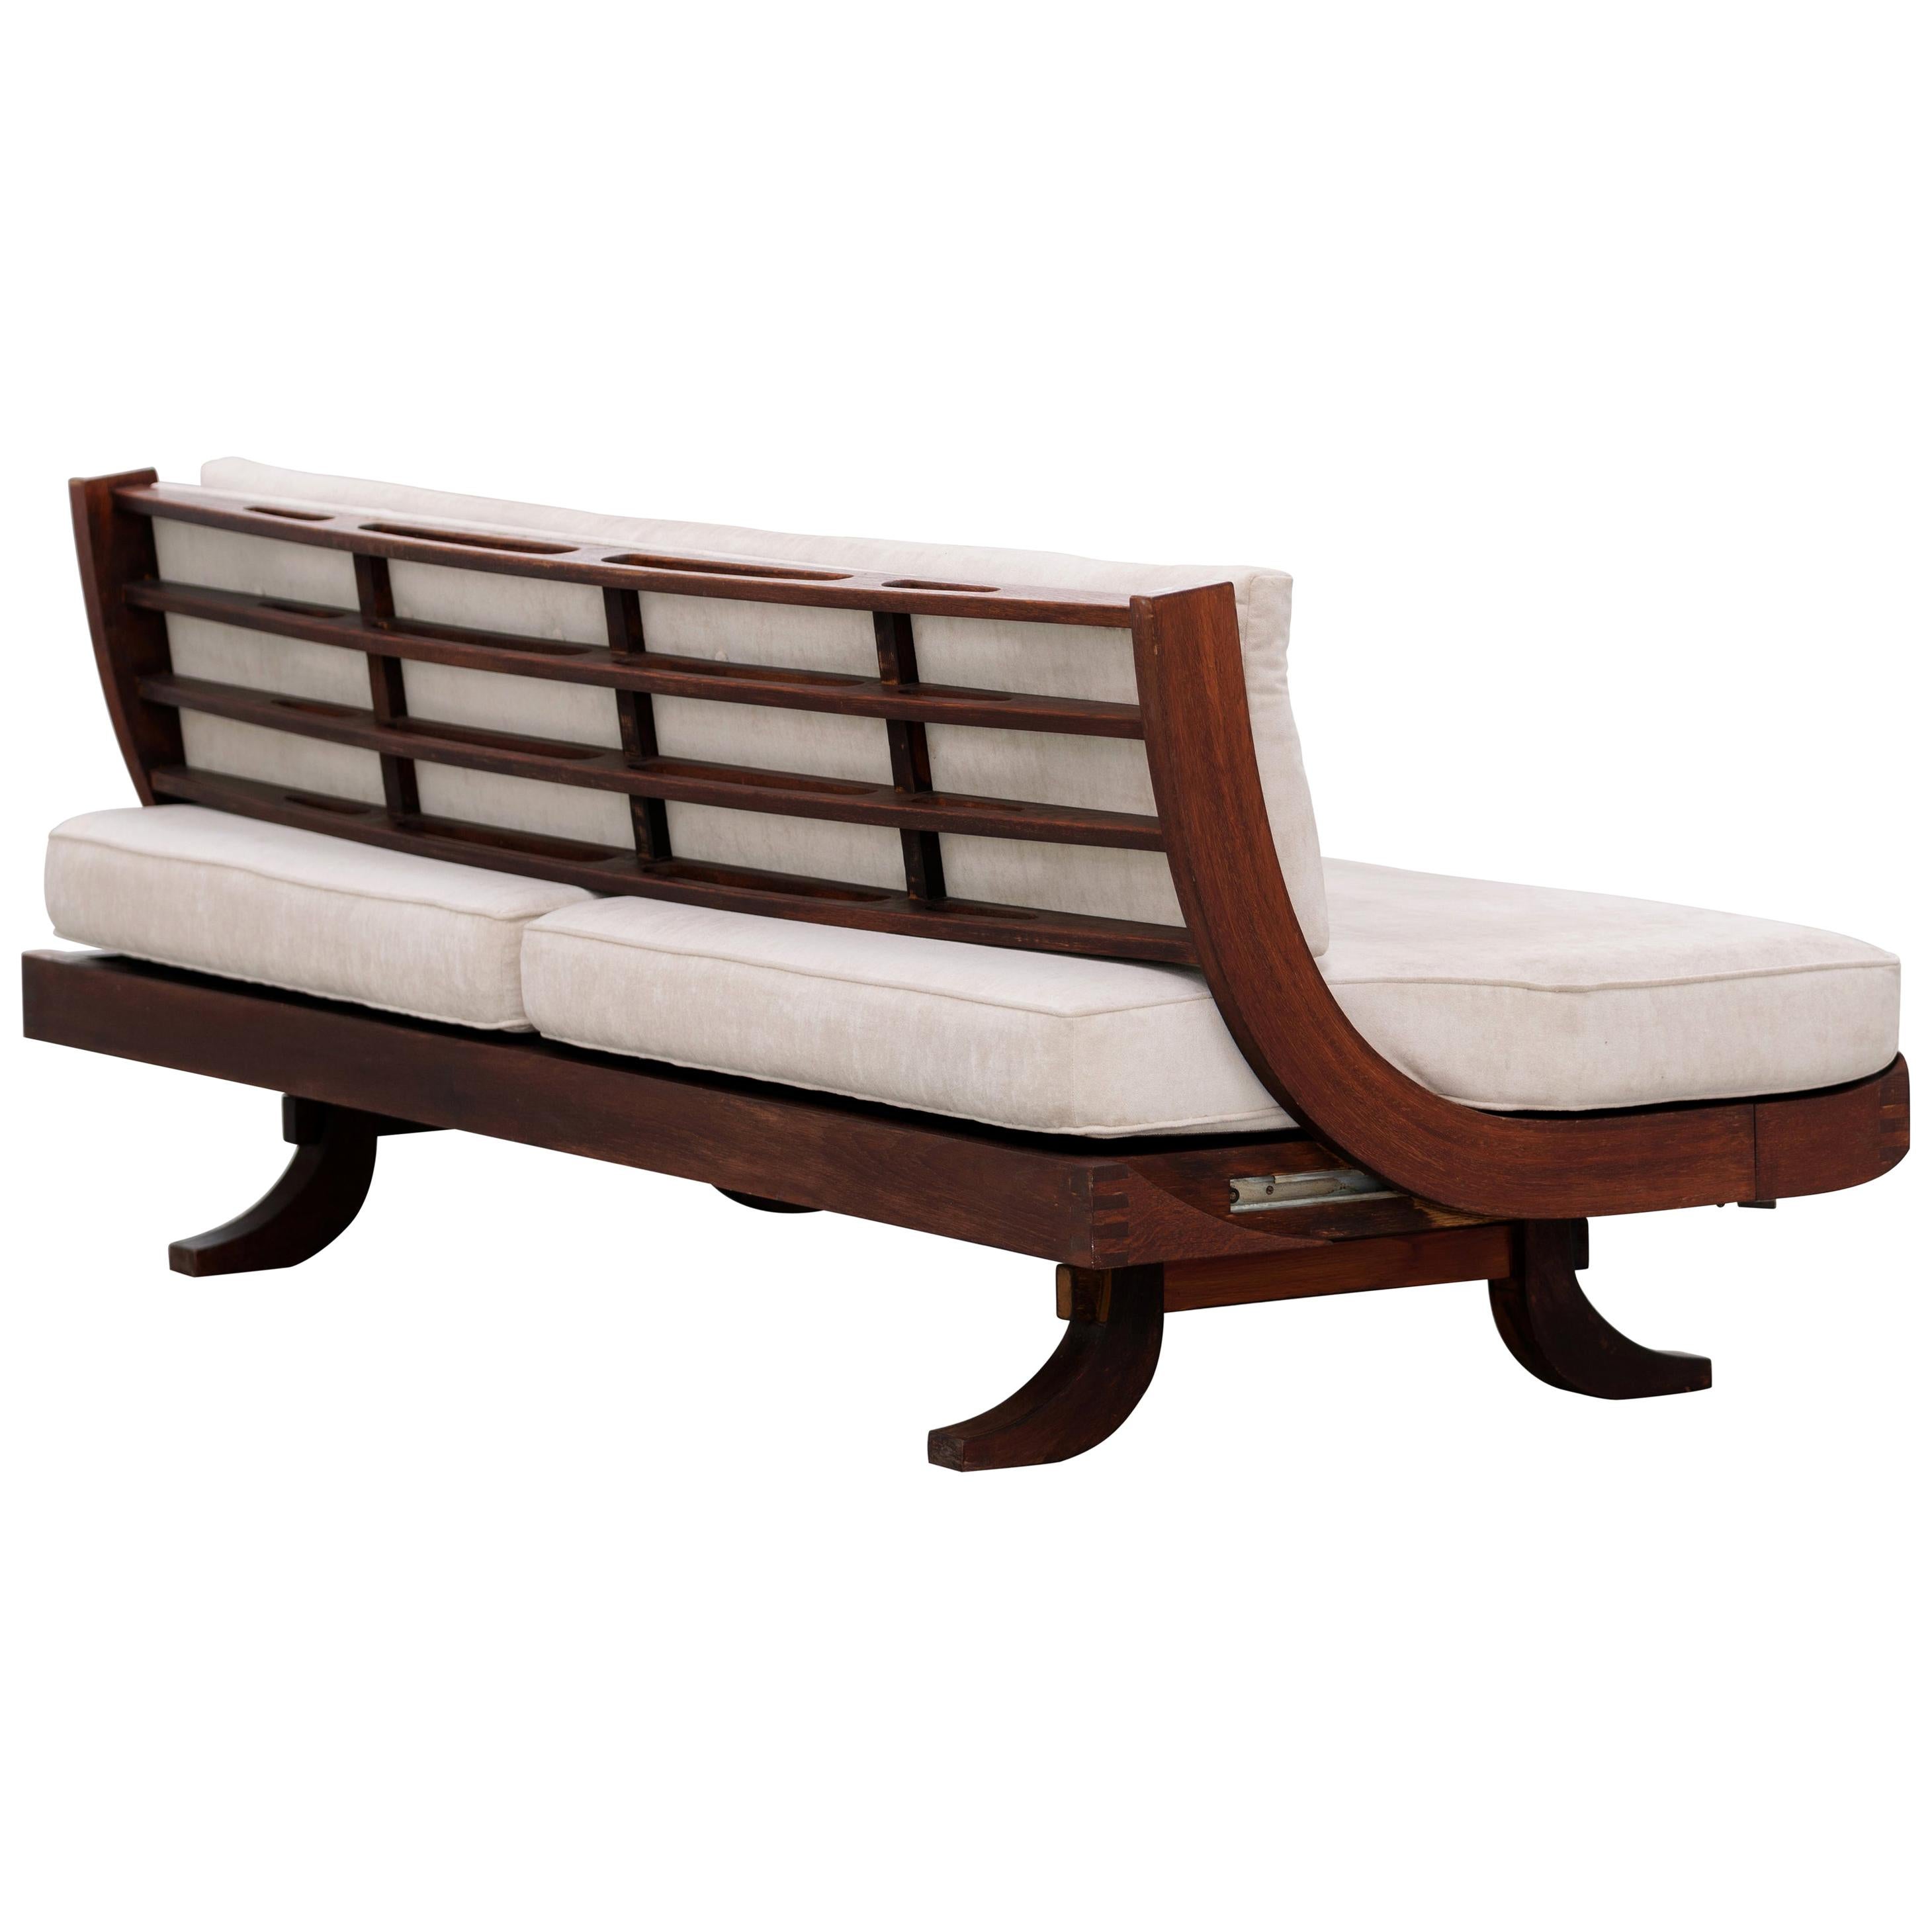 Brazilian Daybed & Sofa, 1966, Sophisticated Wood Details, Lounge & Relax